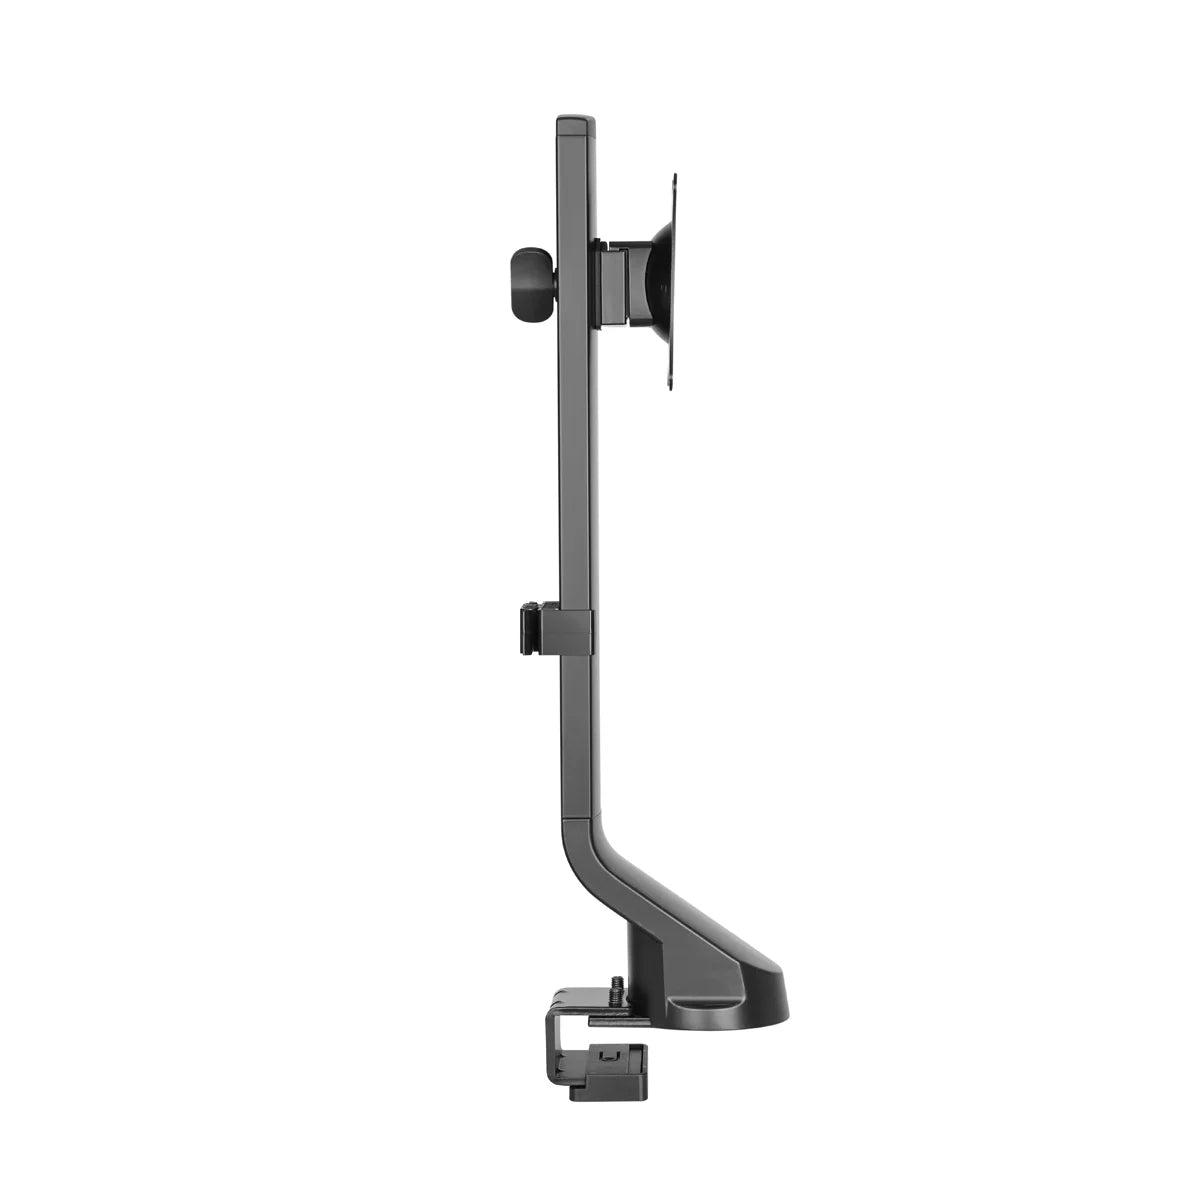 SkillTech - SH 21 C01 - Single Screen Sit-Stand Workstation Compatible Monitor Arm